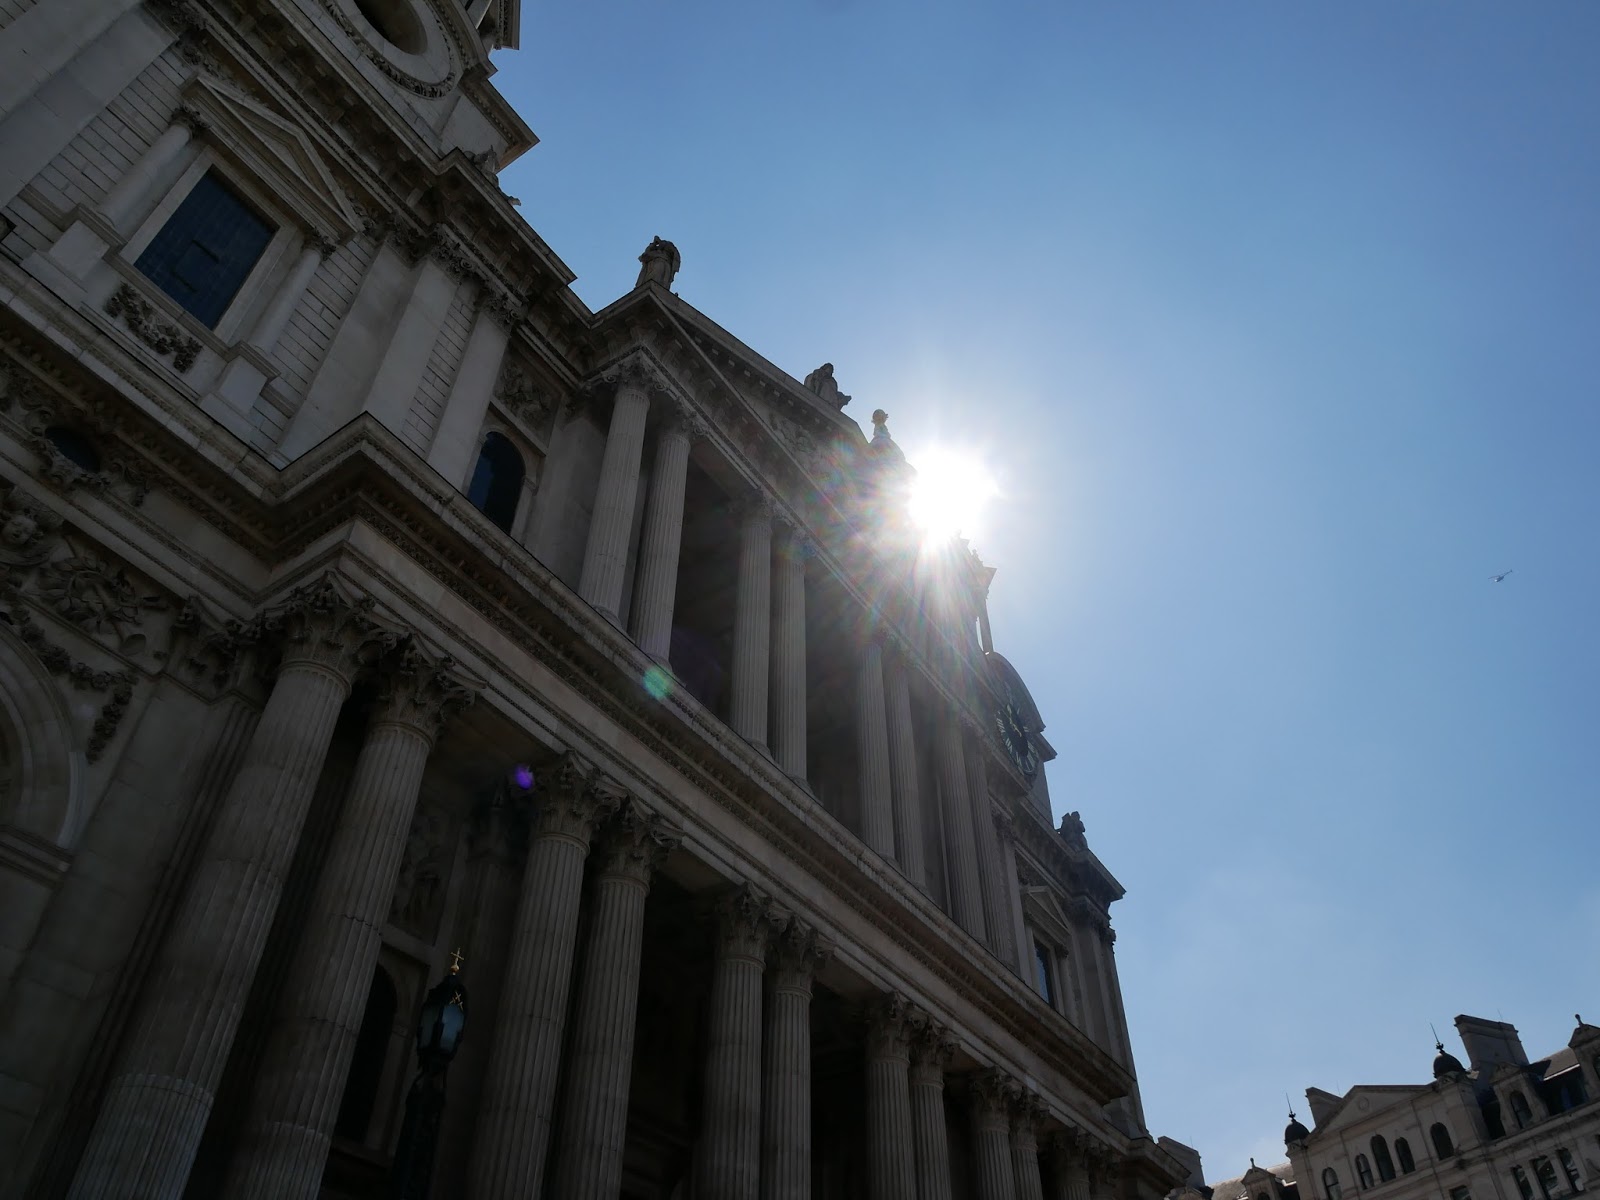 The sun beating down on the front of St. Paul's Cathedral, London